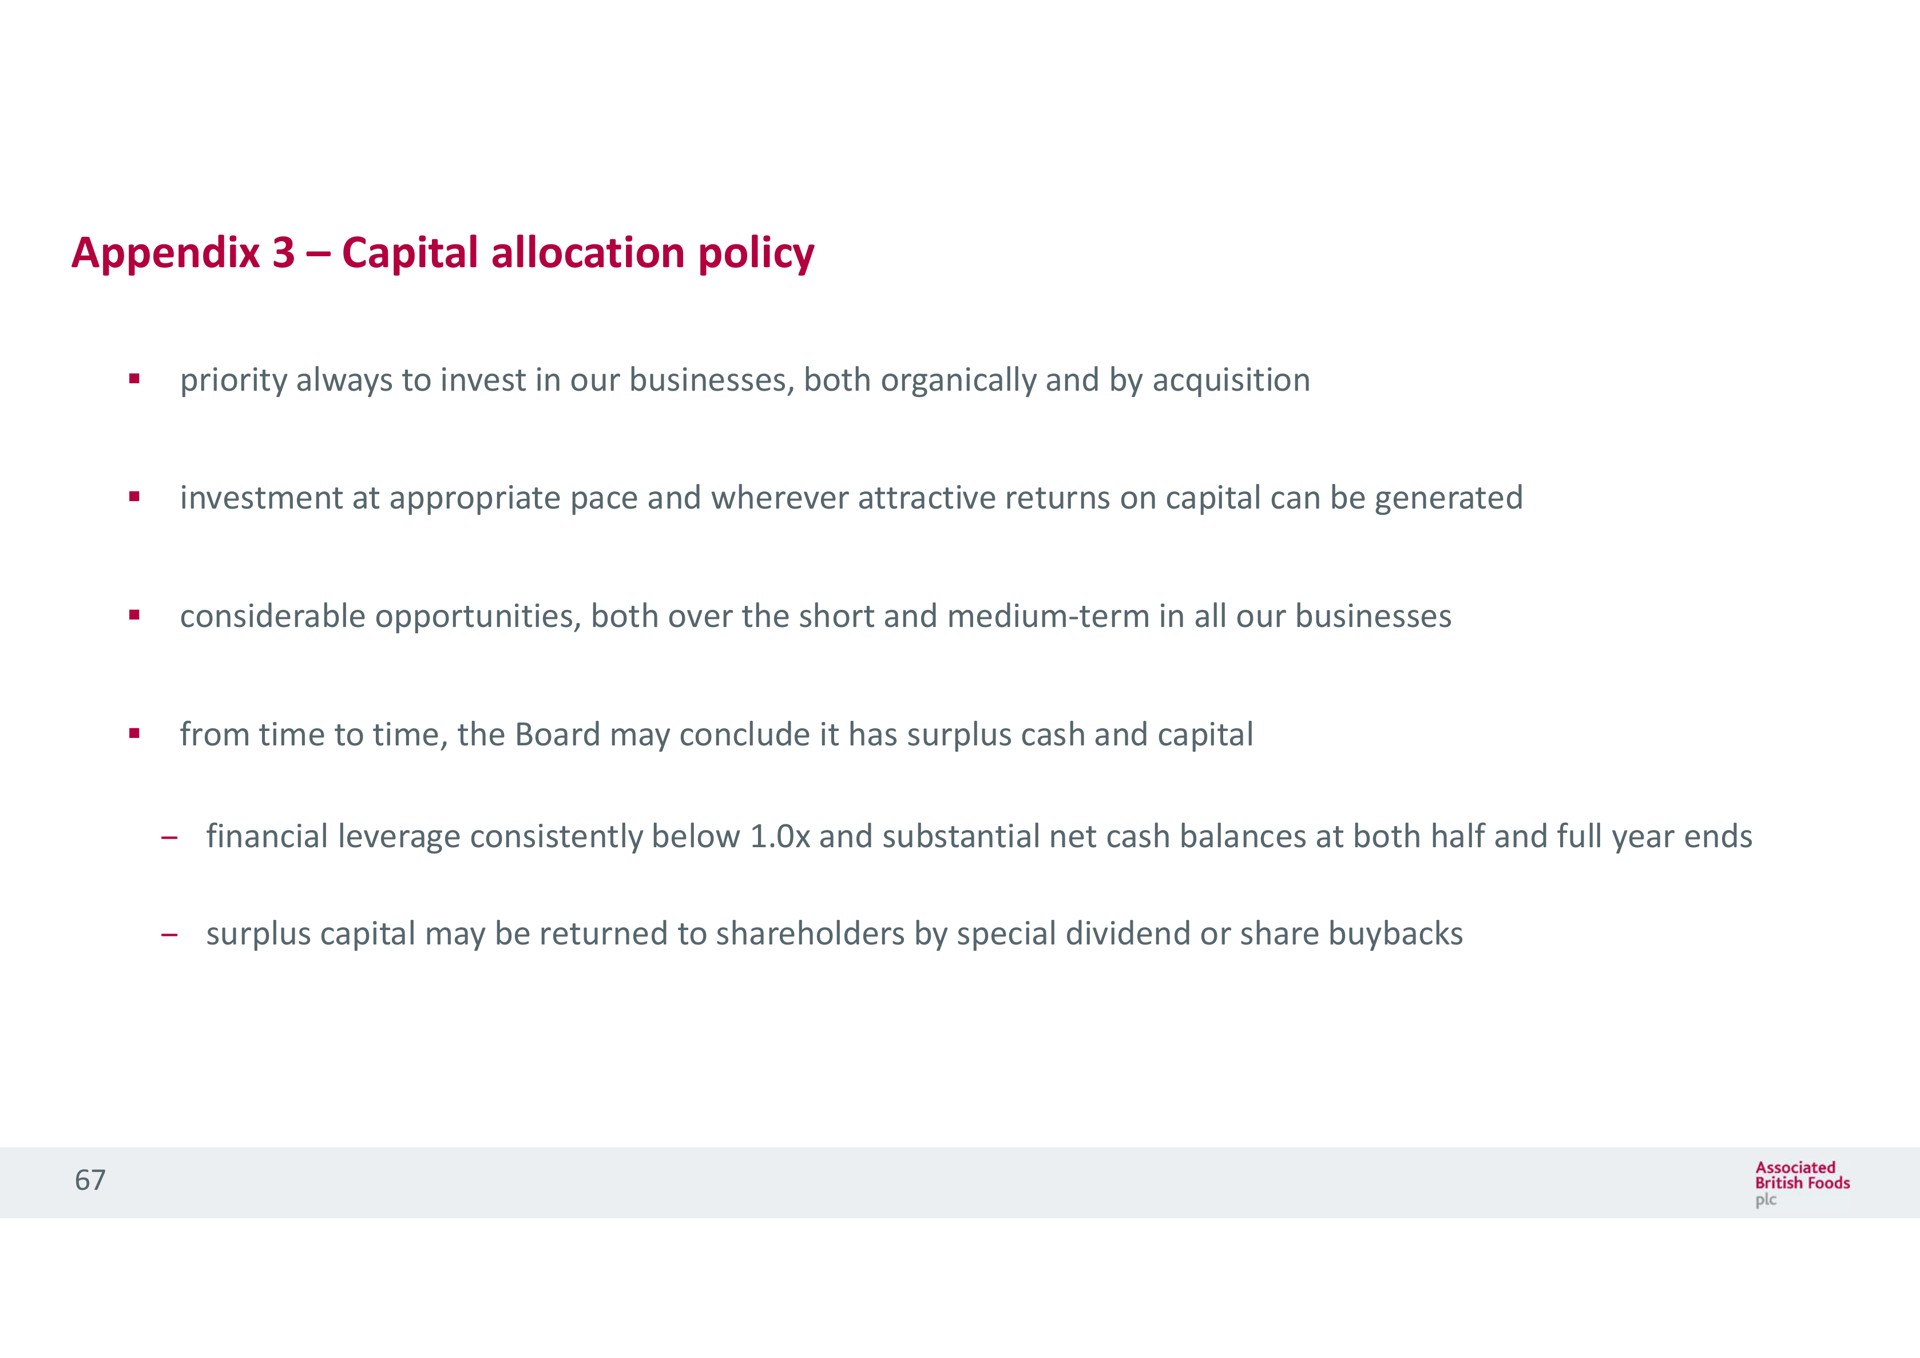 appendix capital allocation policy investment at appropriate pace and wherever attractive returns on can be generated | Associated British Foods